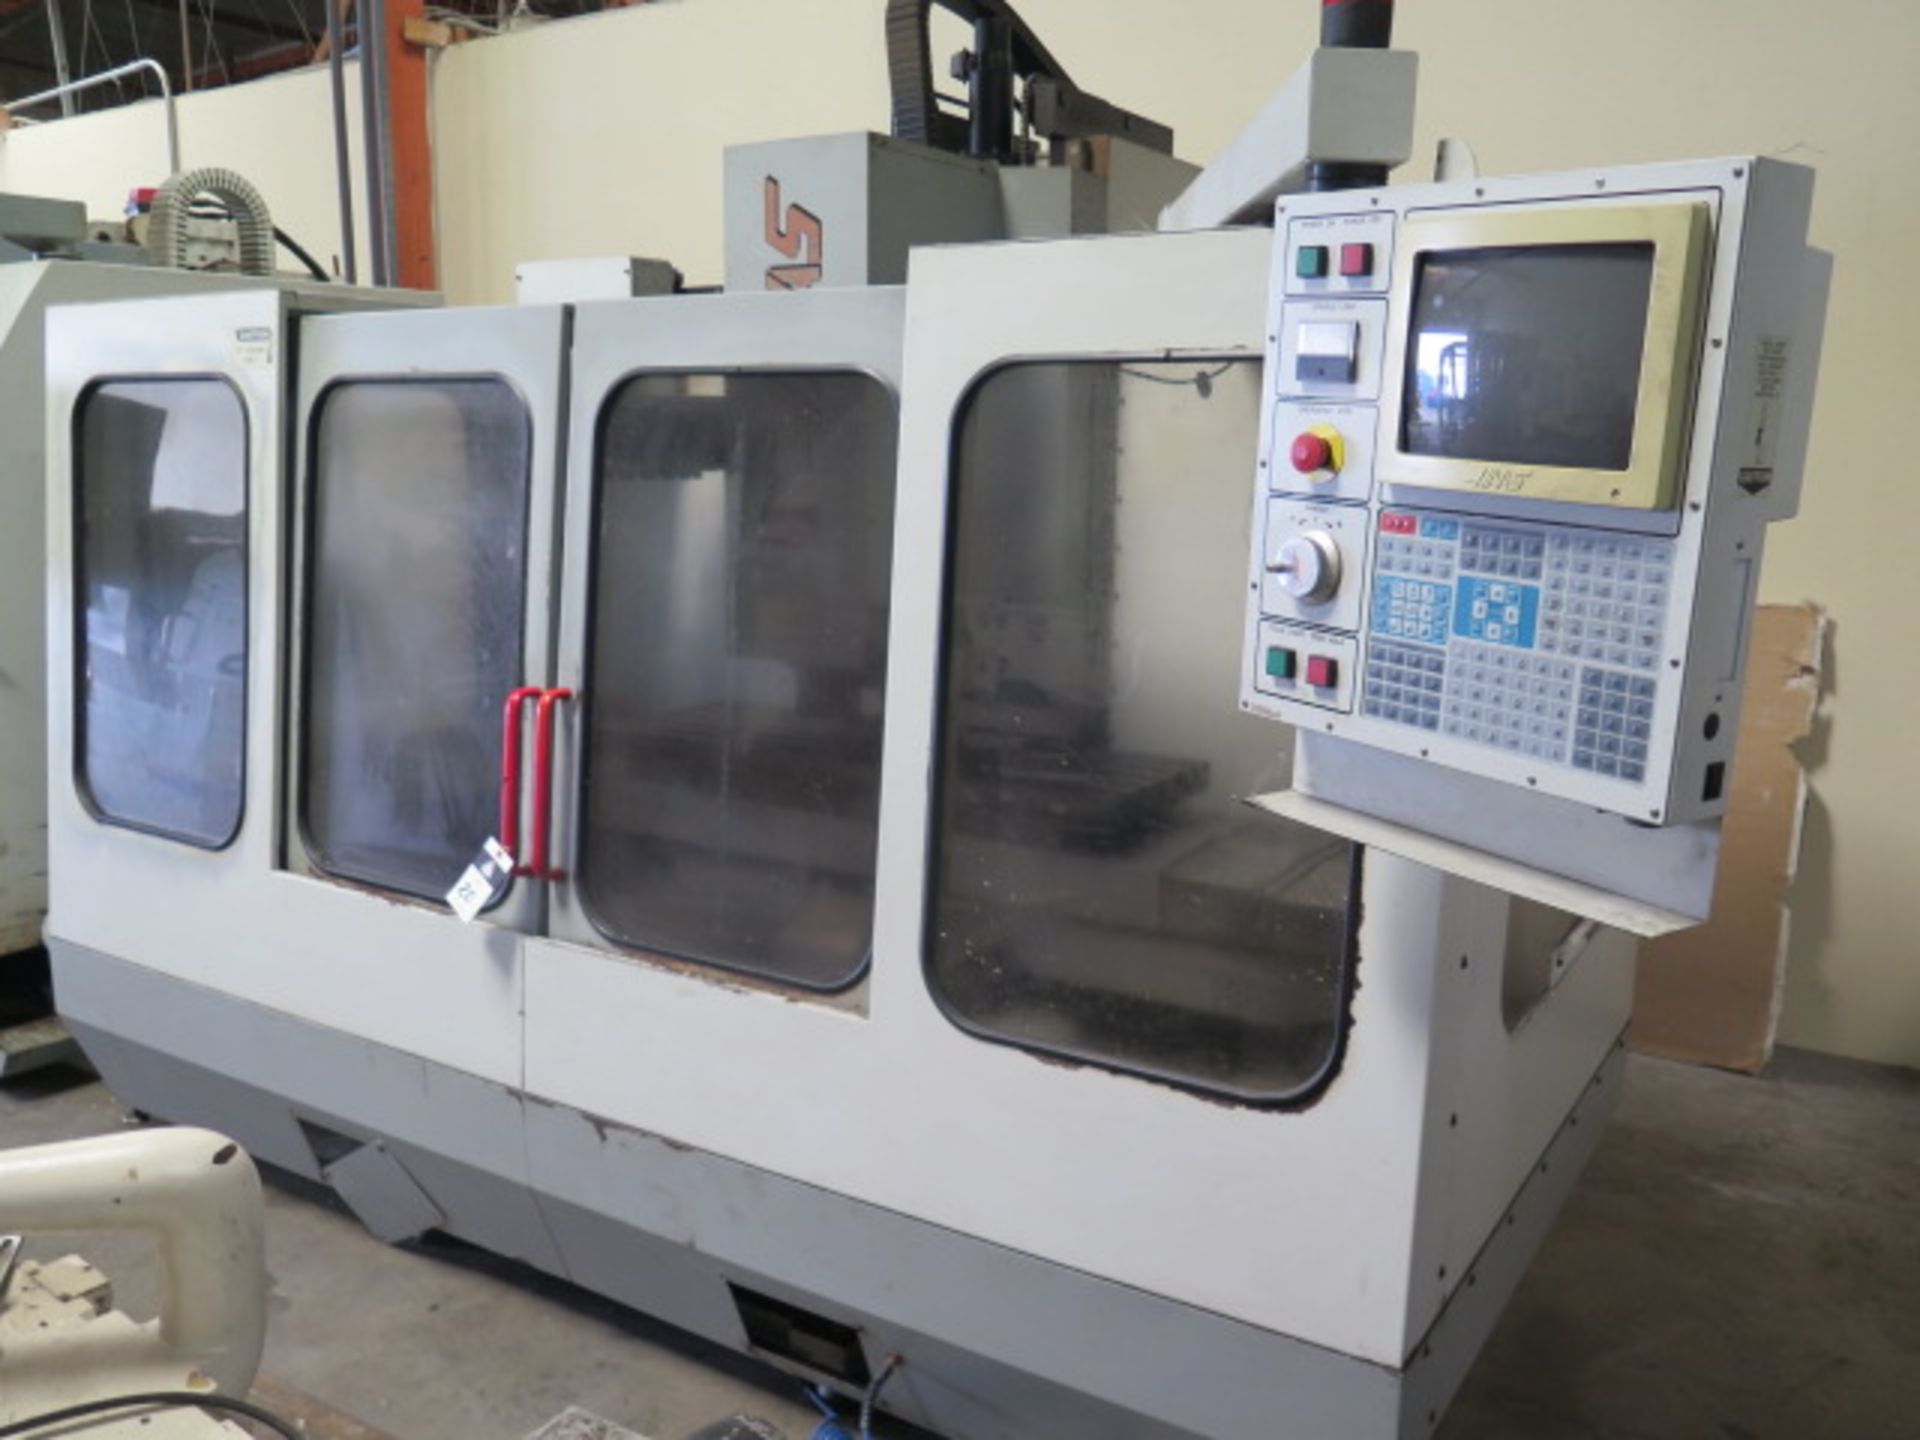 1995 Haas VF-4 4-Axis CNC VMC s/n 4478 w/ Haas Controls, 20-Station ATC, CAT-40, SOLD AS IS - Image 2 of 16